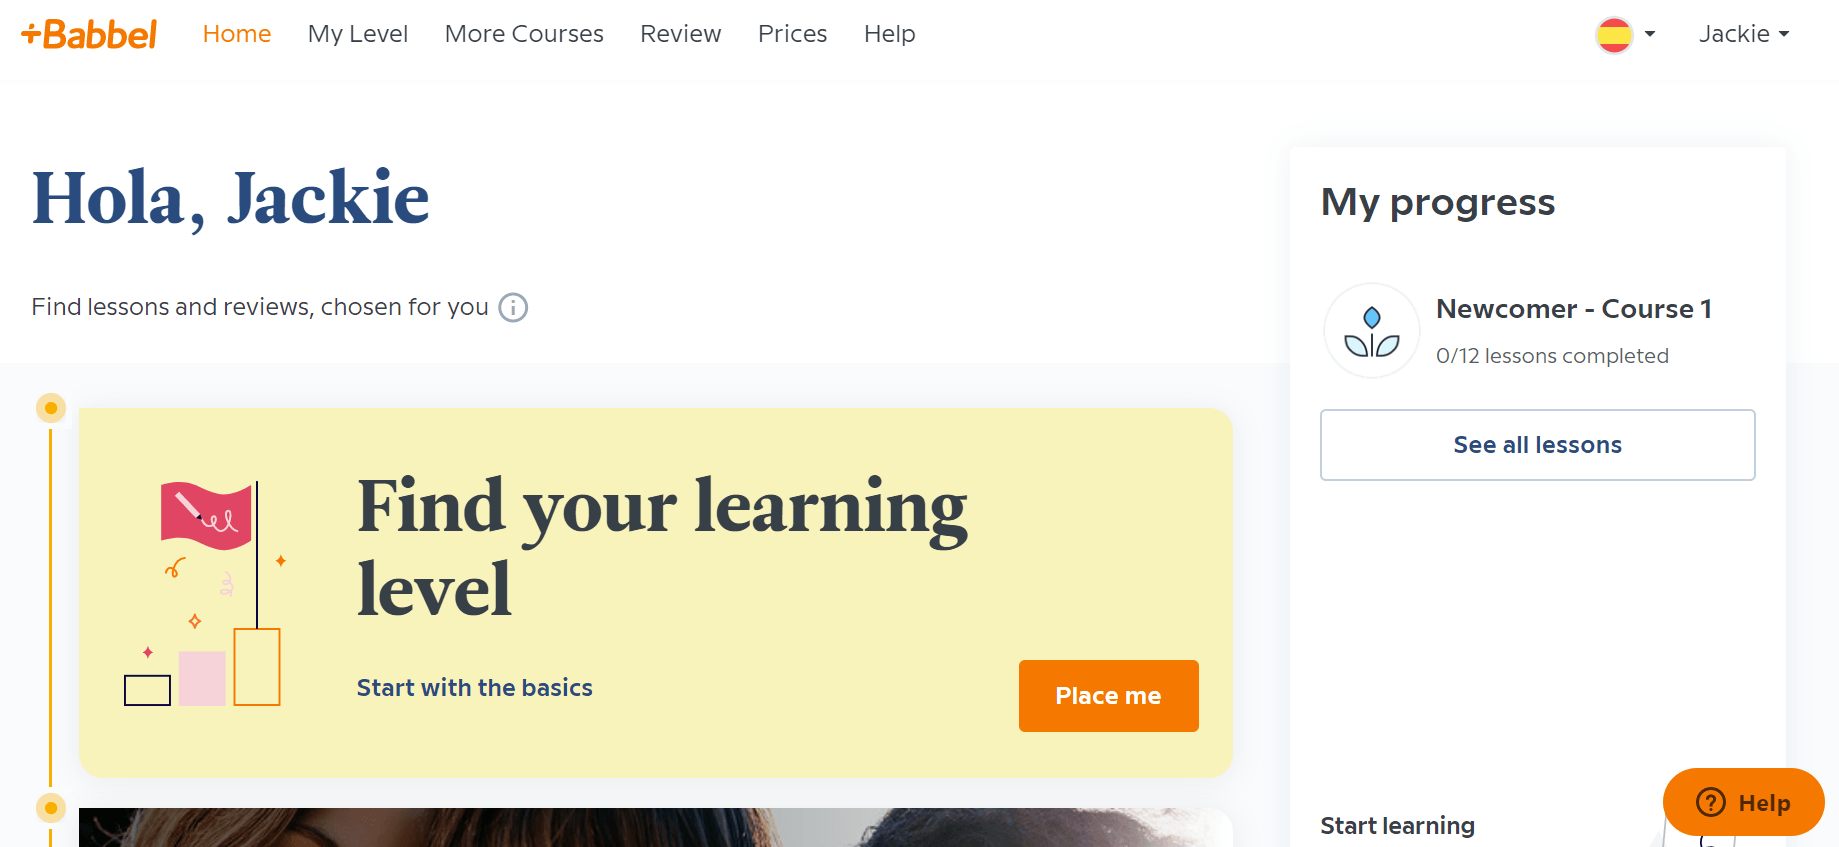 Getting Started with Babbel